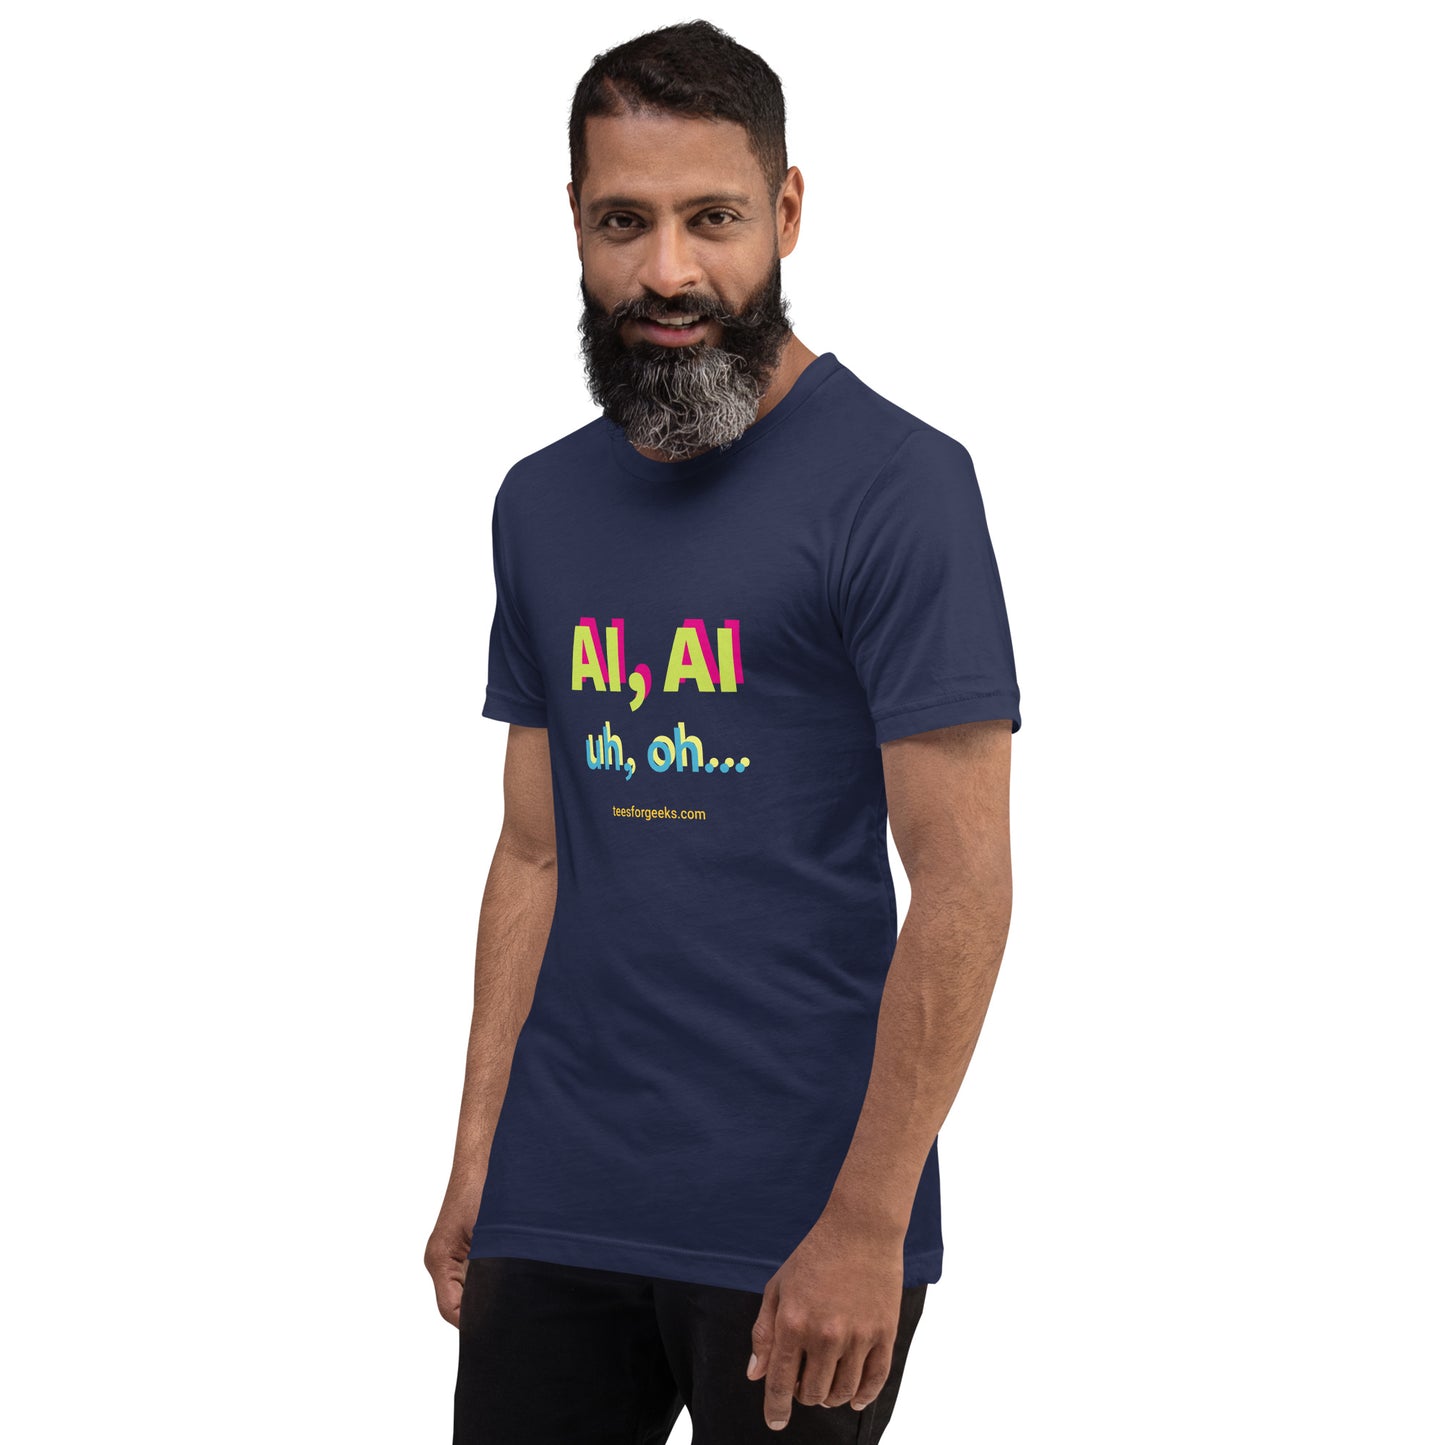 For the AI doomer in your life!